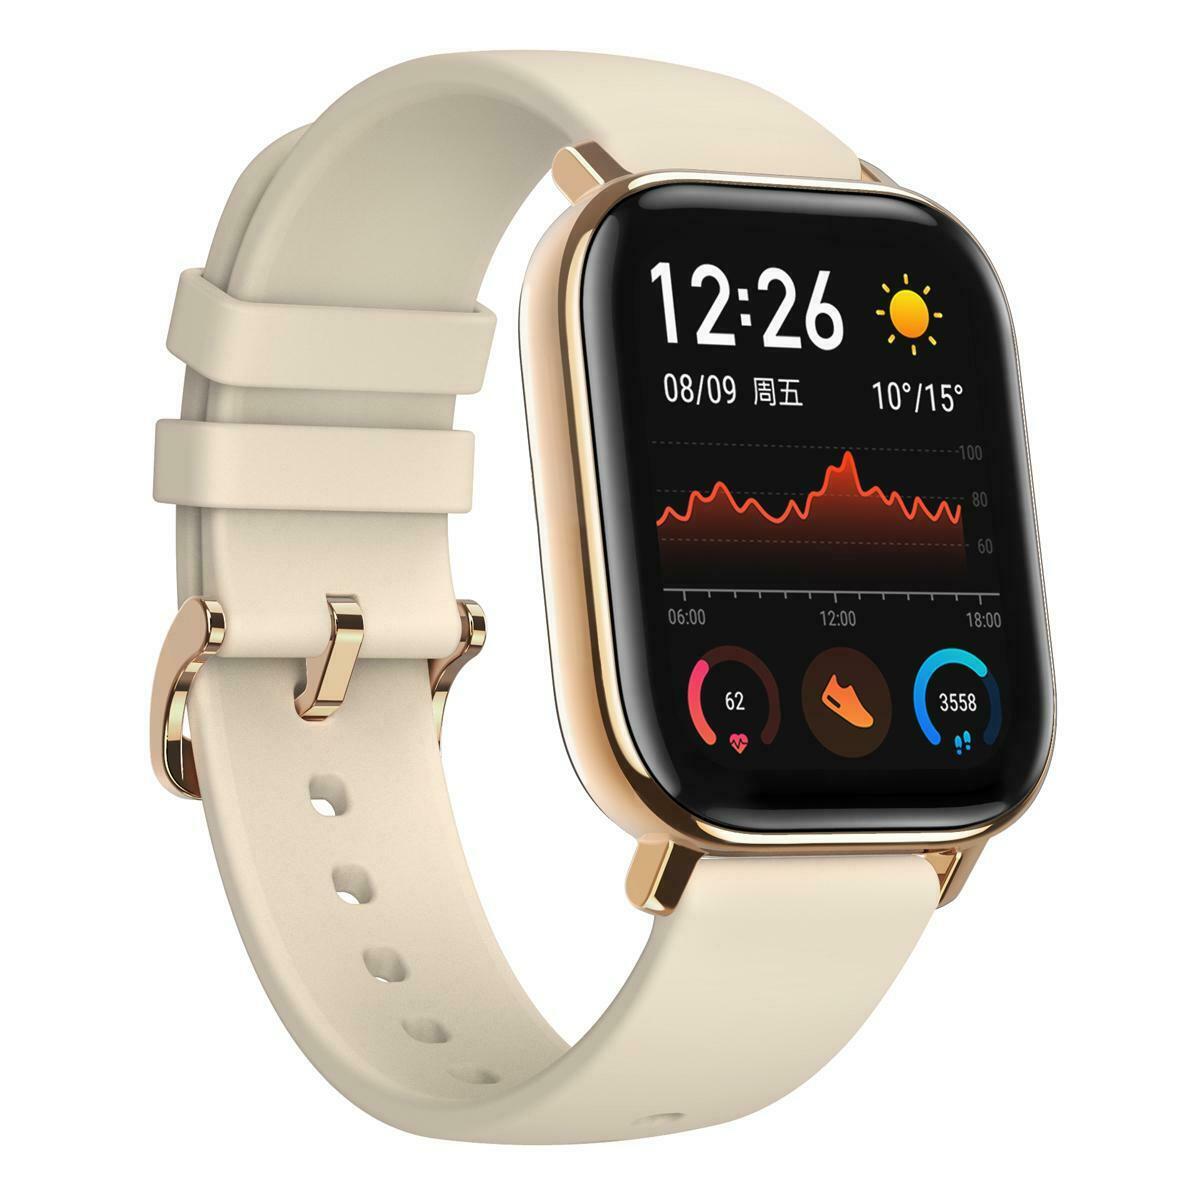 S L1600 5 Xiaomi &Lt;Div Id=&Quot;Product-Description-Short-889&Quot; Class=&Quot;Product-Description-Short&Quot;&Gt; &Lt;Strong&Gt;Xiaomi Amazfit Gts&Lt;/Strong&Gt; - Smartwatch Combining Elegance And Sport, Amoled Display, Extreme Endurance Of Up To 46 Days, Bluetooth, Gps, Biotracker For Heart Rate Measurement, 12 Supported Sports Activities, Aluminium Body And Much More... Gold Color. &Lt;/Div&Gt; &Lt;Div Class=&Quot;Product-Actions&Quot;&Gt;&Lt;Form Id=&Quot;Add-To-Cart-Or-Refresh&Quot; Action=&Quot;Https://Xiaomi-Store.cz/En/Cart&Quot; Method=&Quot;Post&Quot;&Gt; &Lt;Div Class=&Quot;Product-Variants&Quot;&Gt;&Lt;/Div&Gt; &Lt;Div Class=&Quot;Product-Prices&Quot;&Gt; &Lt;Div Class=&Quot;Product-Price H5 &Quot;&Gt;&Lt;/Div&Gt; &Lt;/Div&Gt; &Lt;/Form&Gt;&Lt;/Div&Gt; Xiaomi Amazfit Gts - Desert Gold